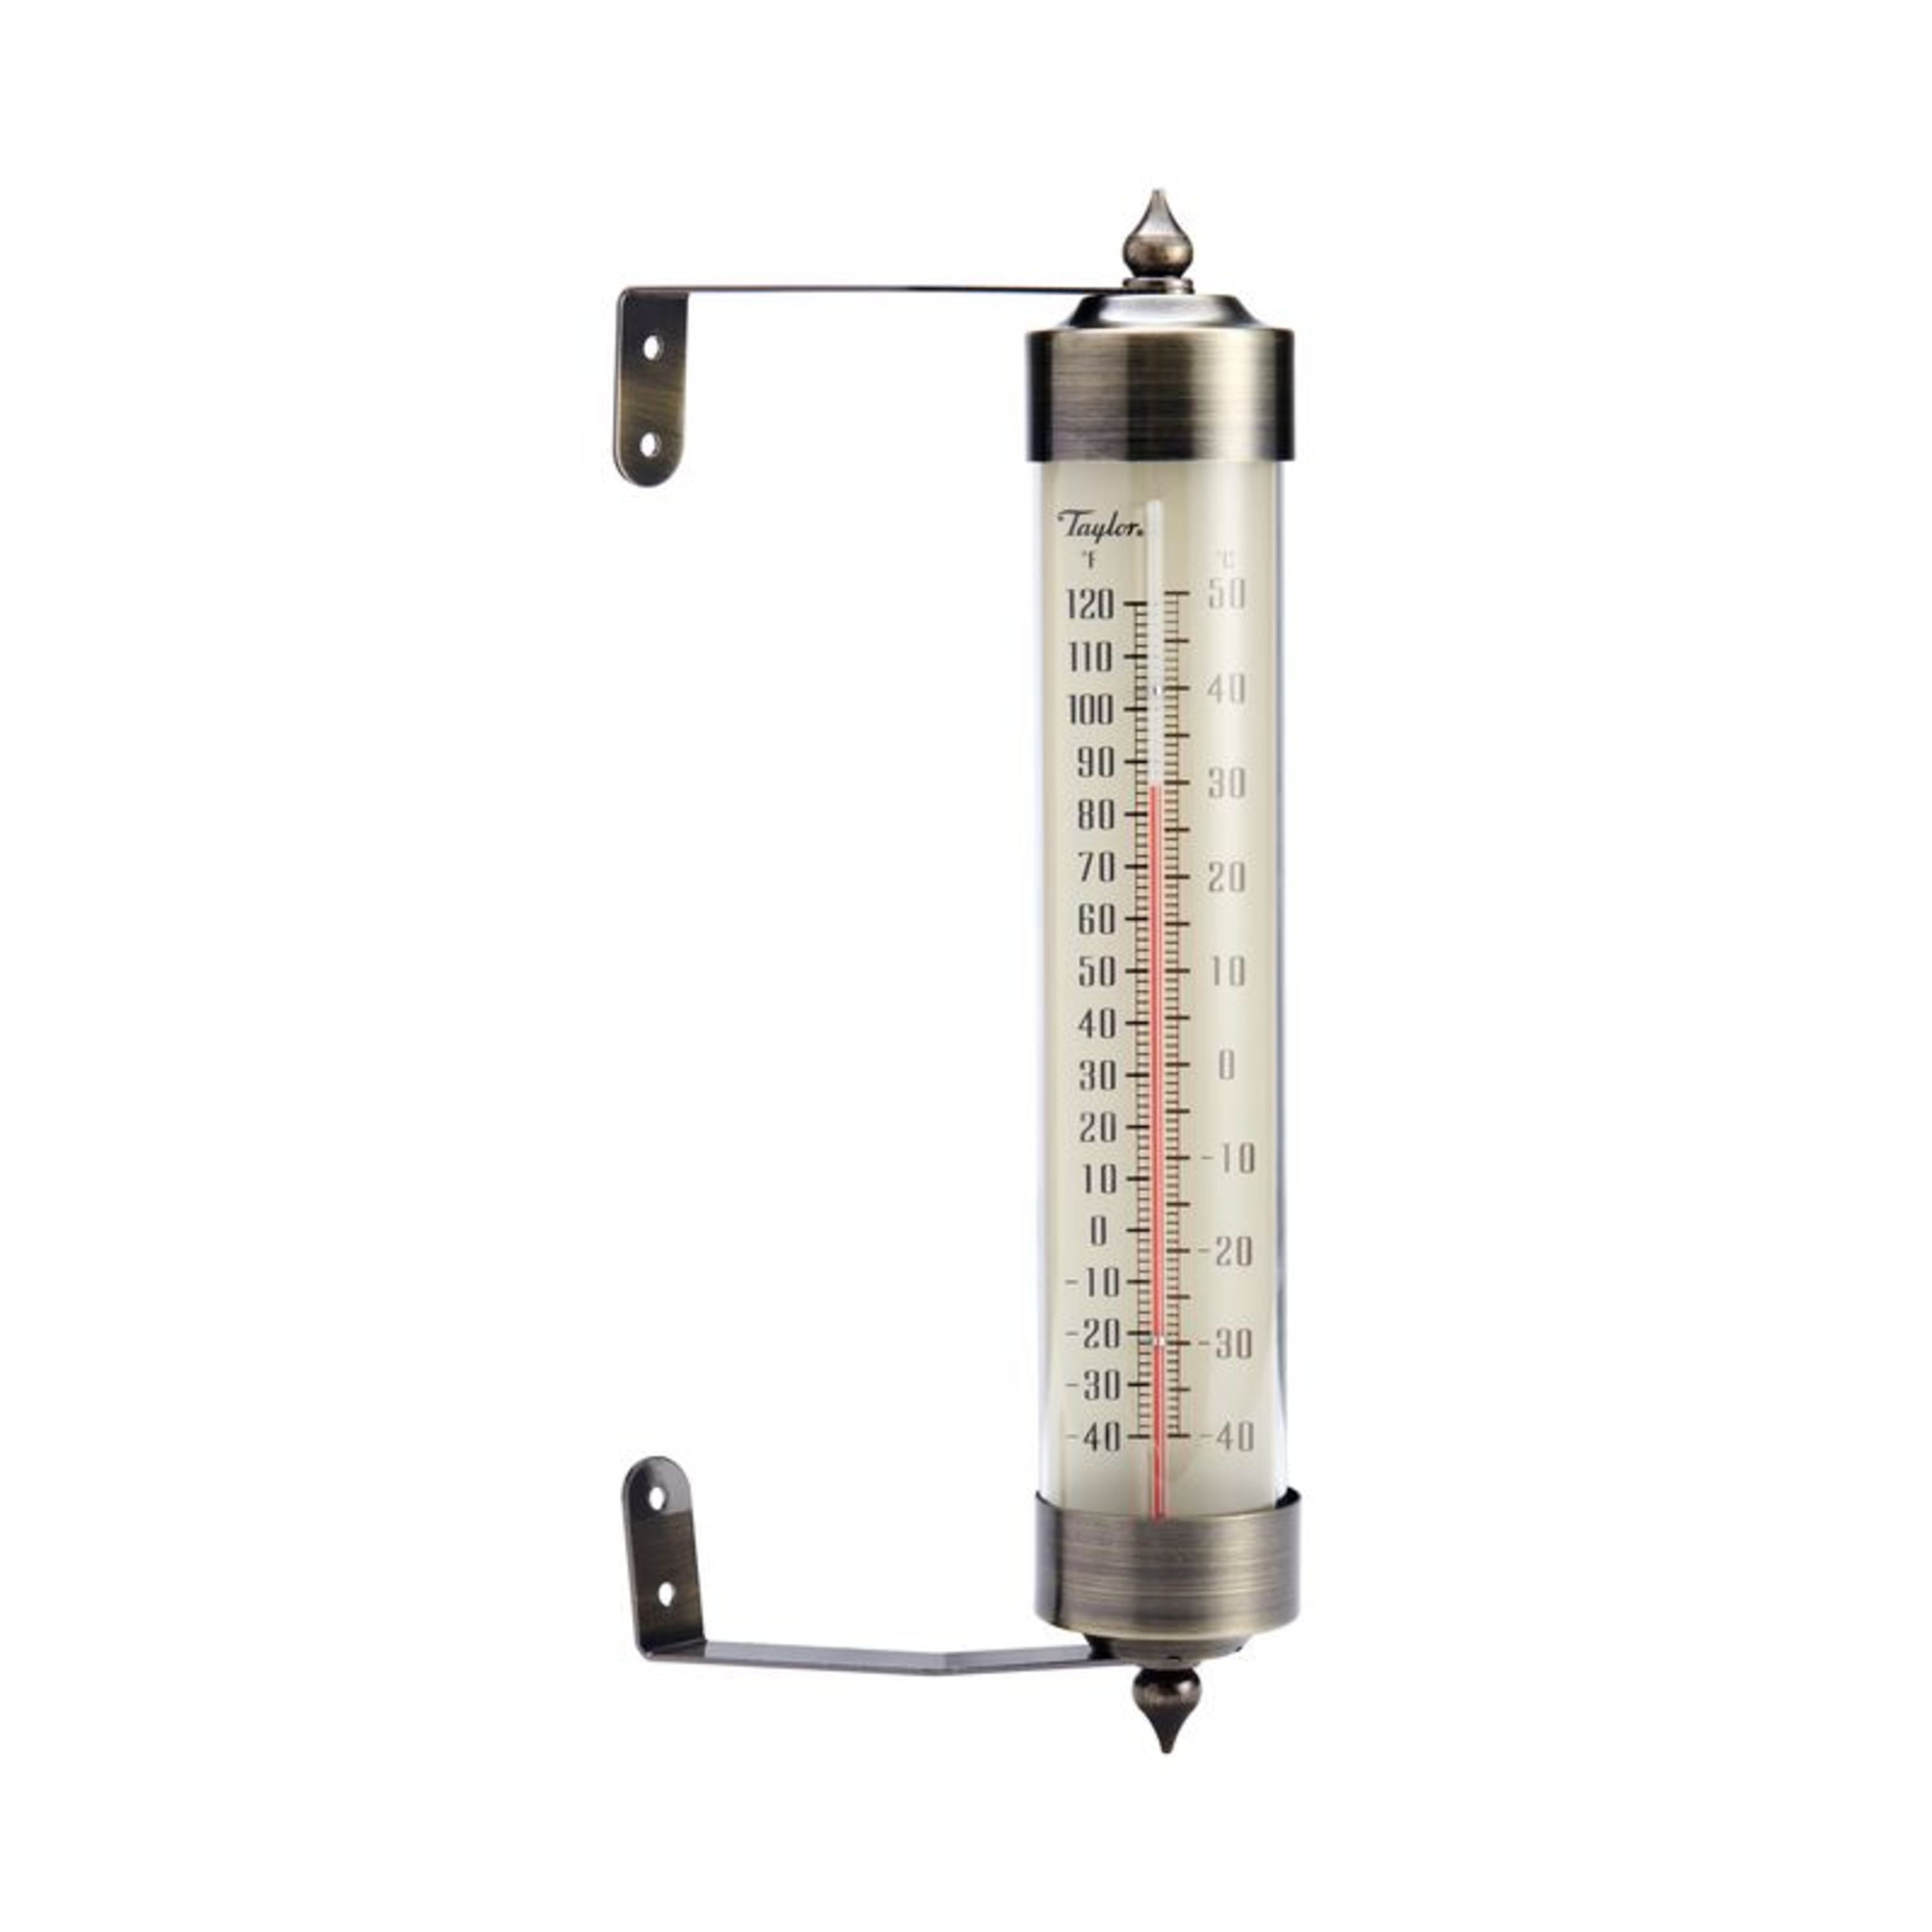 Taylor Precision Products 12.25-Inch Long Glass Tube Thermometer in Copper